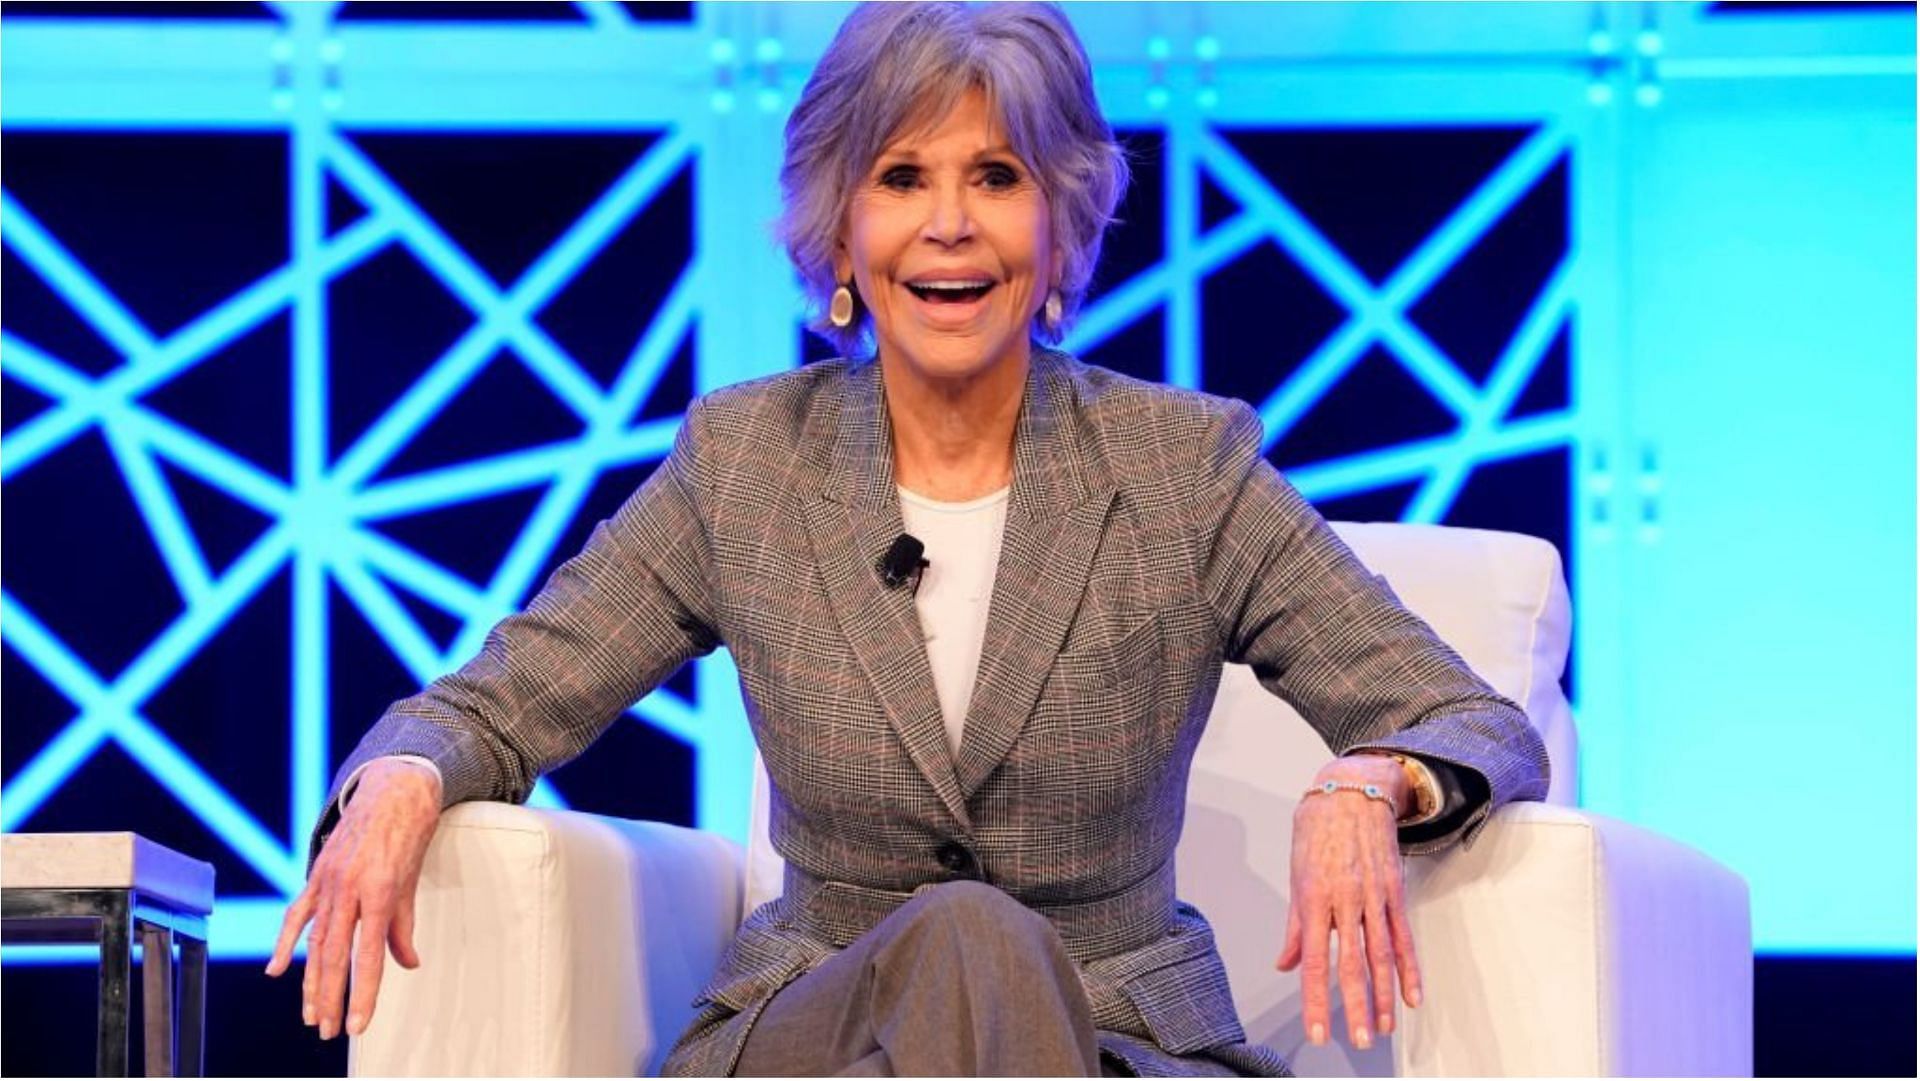 Jane Fonda disclosed her cancer diagnosis in September 2022 (Image via Marla Aufmuth/Getty Images)